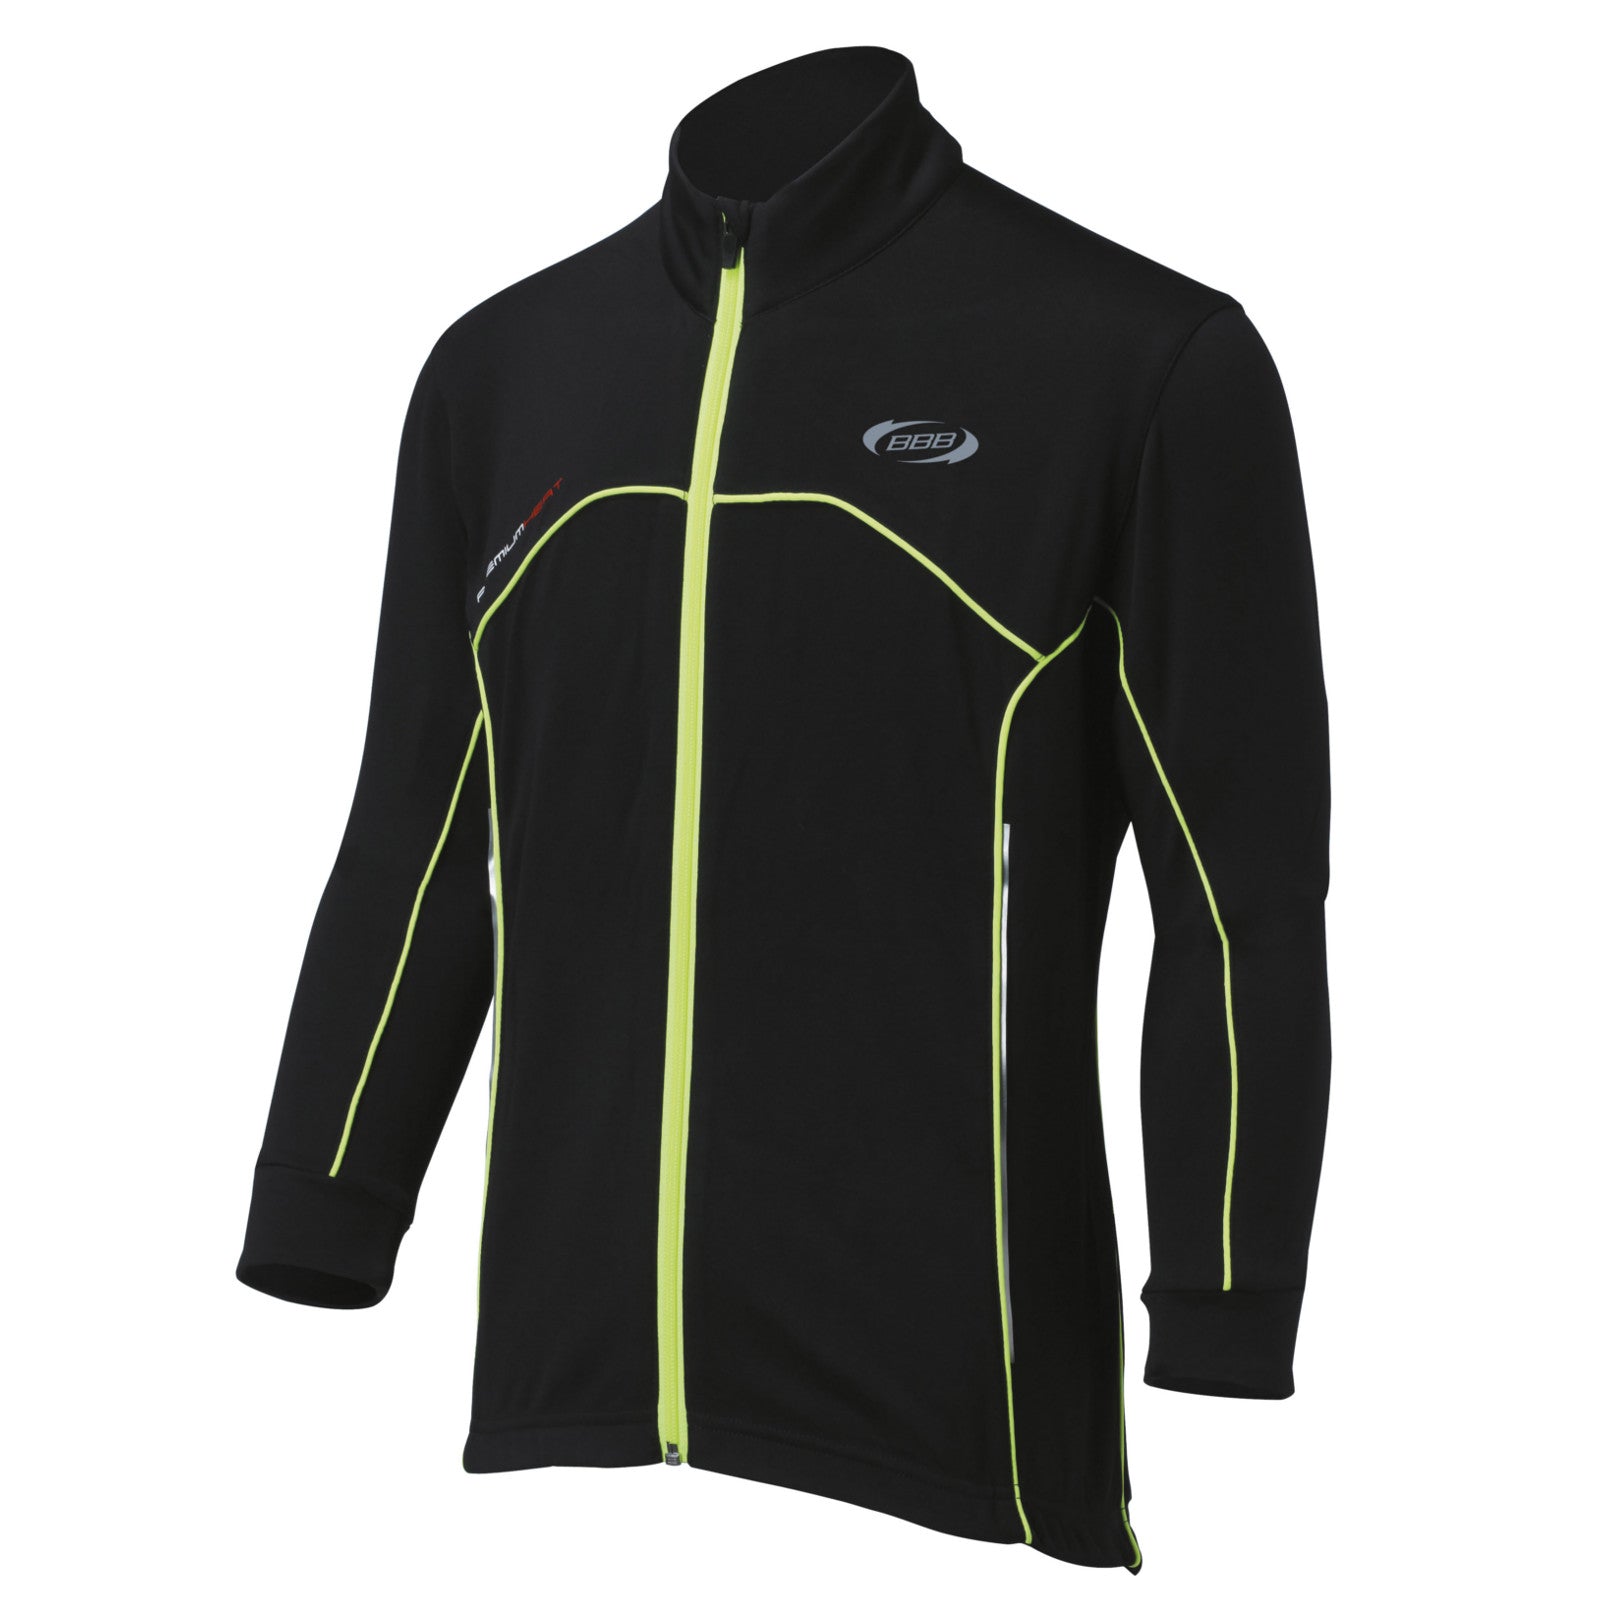 BBB Easyshield Men's Windproof Cycling Jacket Small